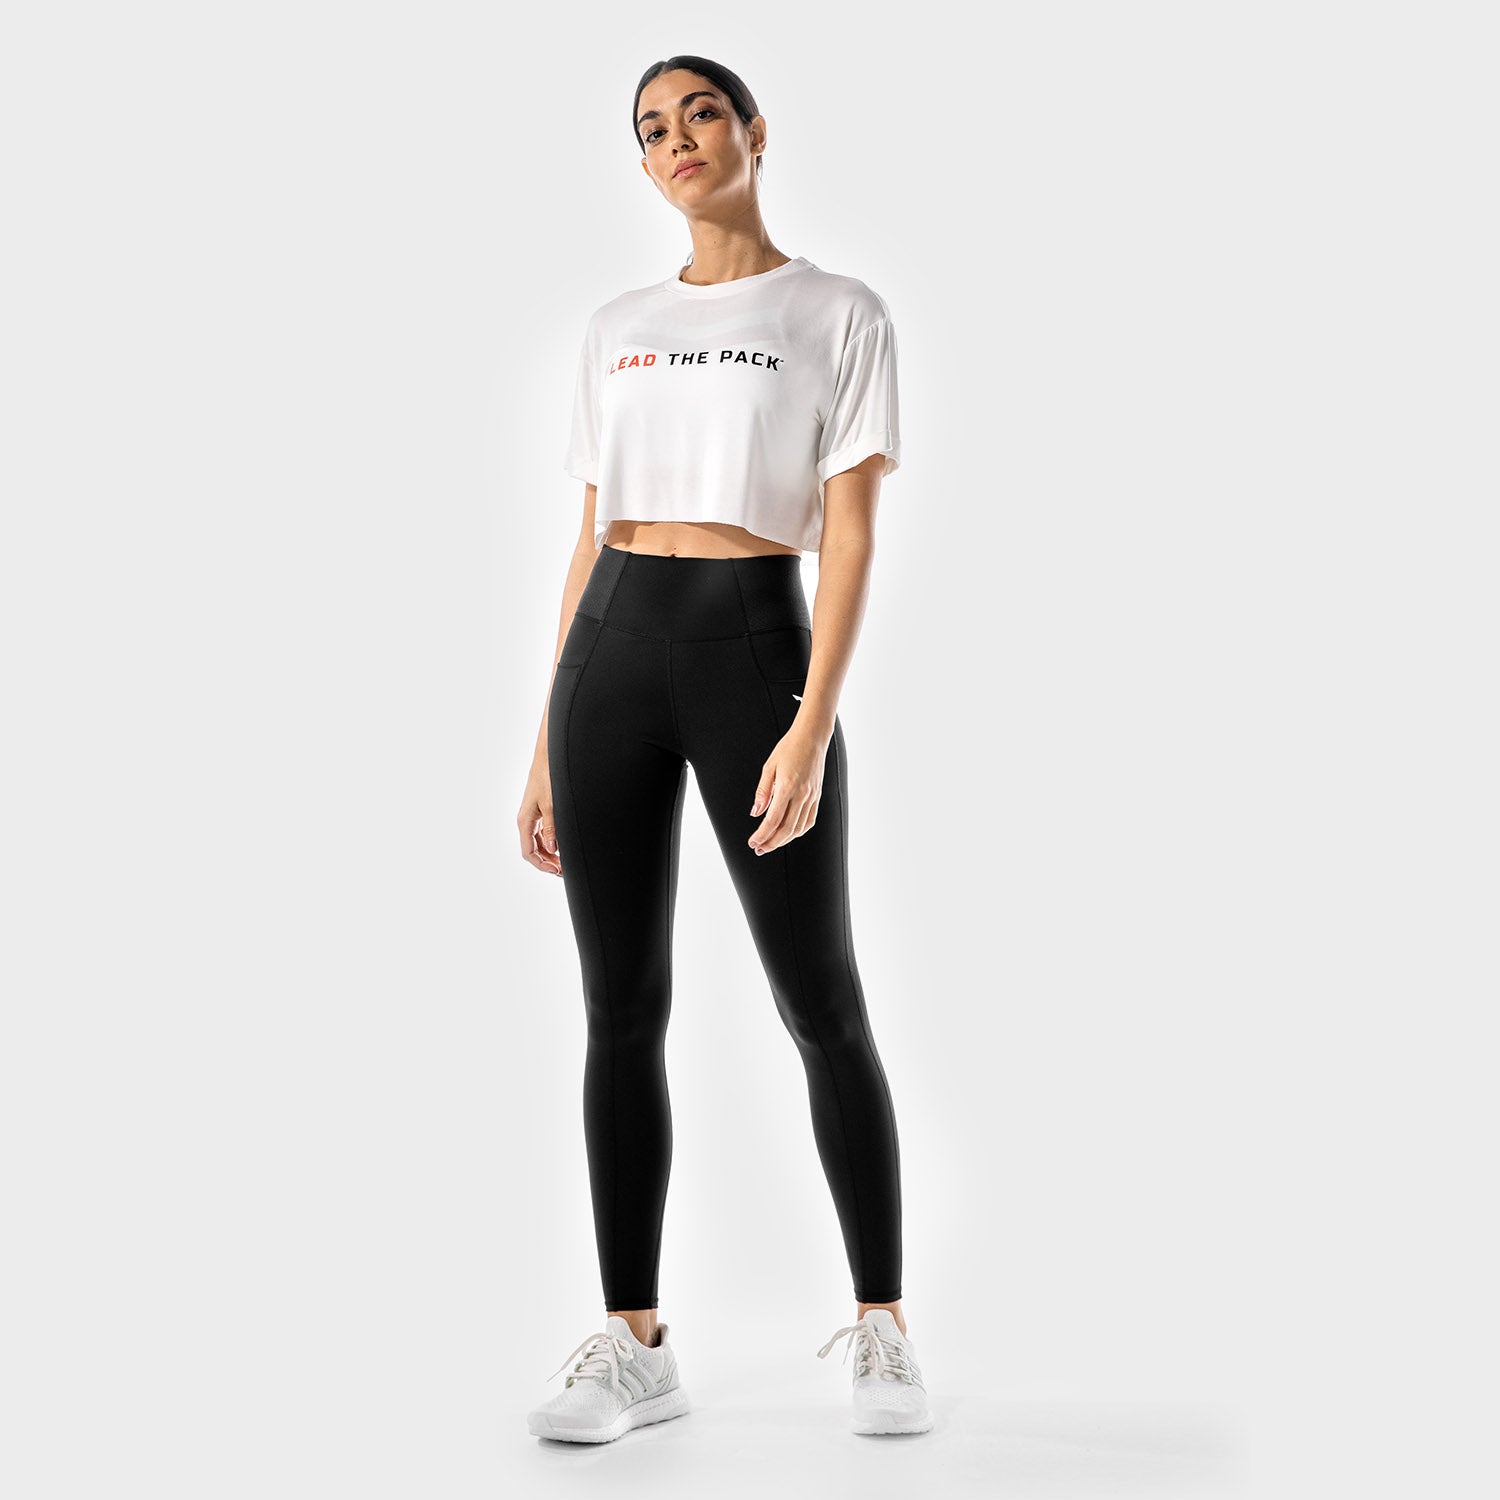 squatwolf-gym-t-shirts-for-women-the-pack-tee-white-workout-clothes